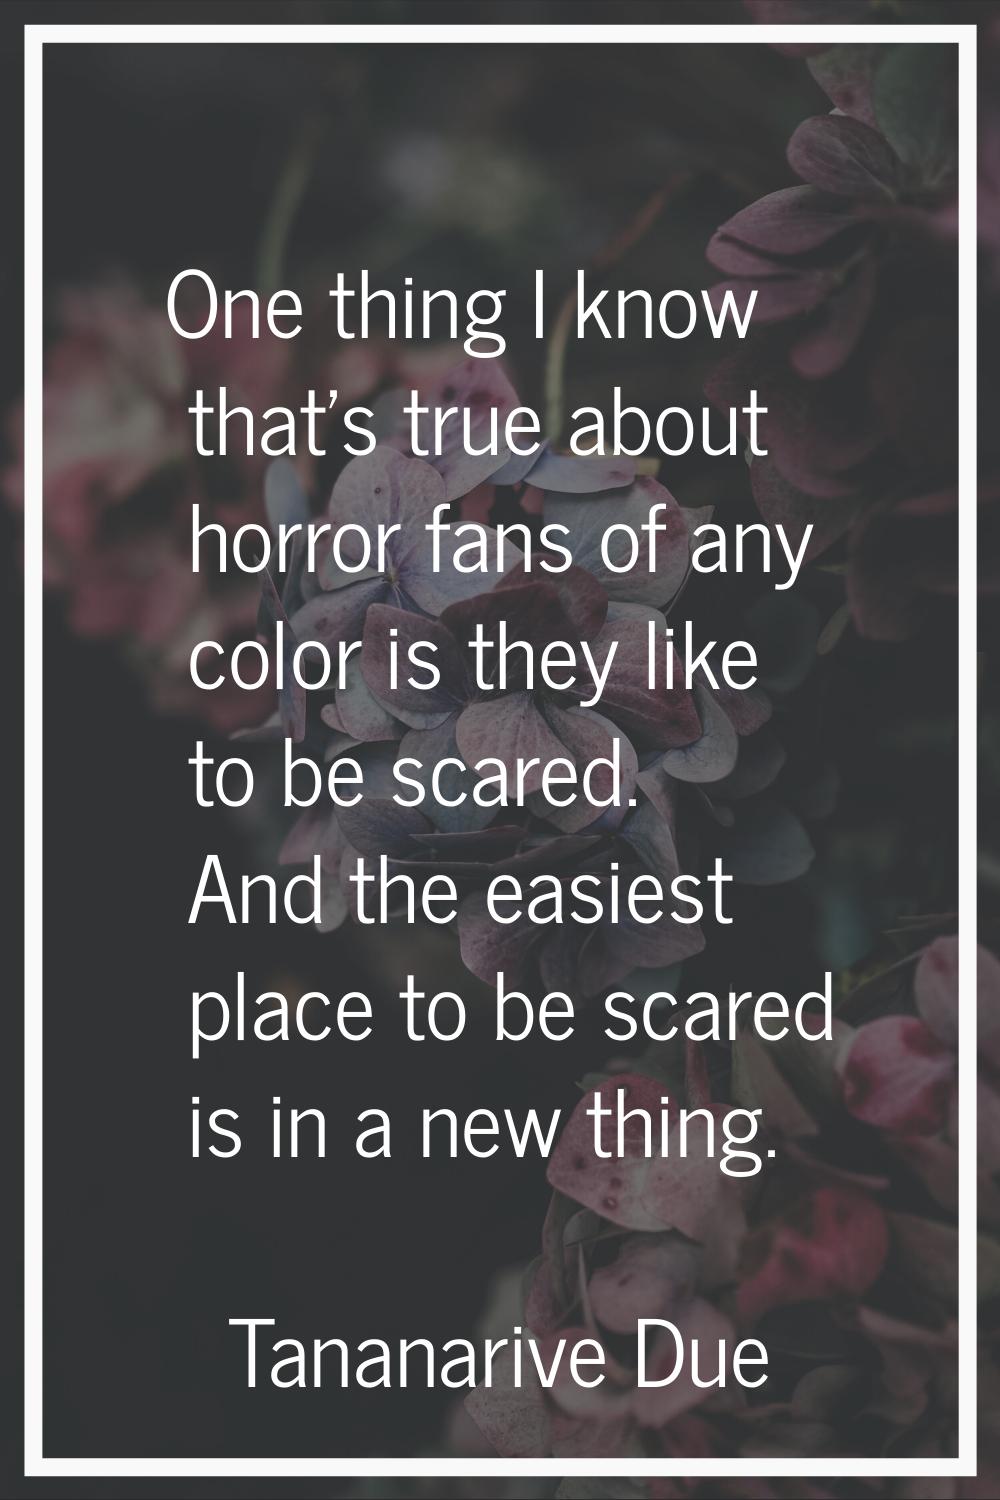 One thing I know that's true about horror fans of any color is they like to be scared. And the easi